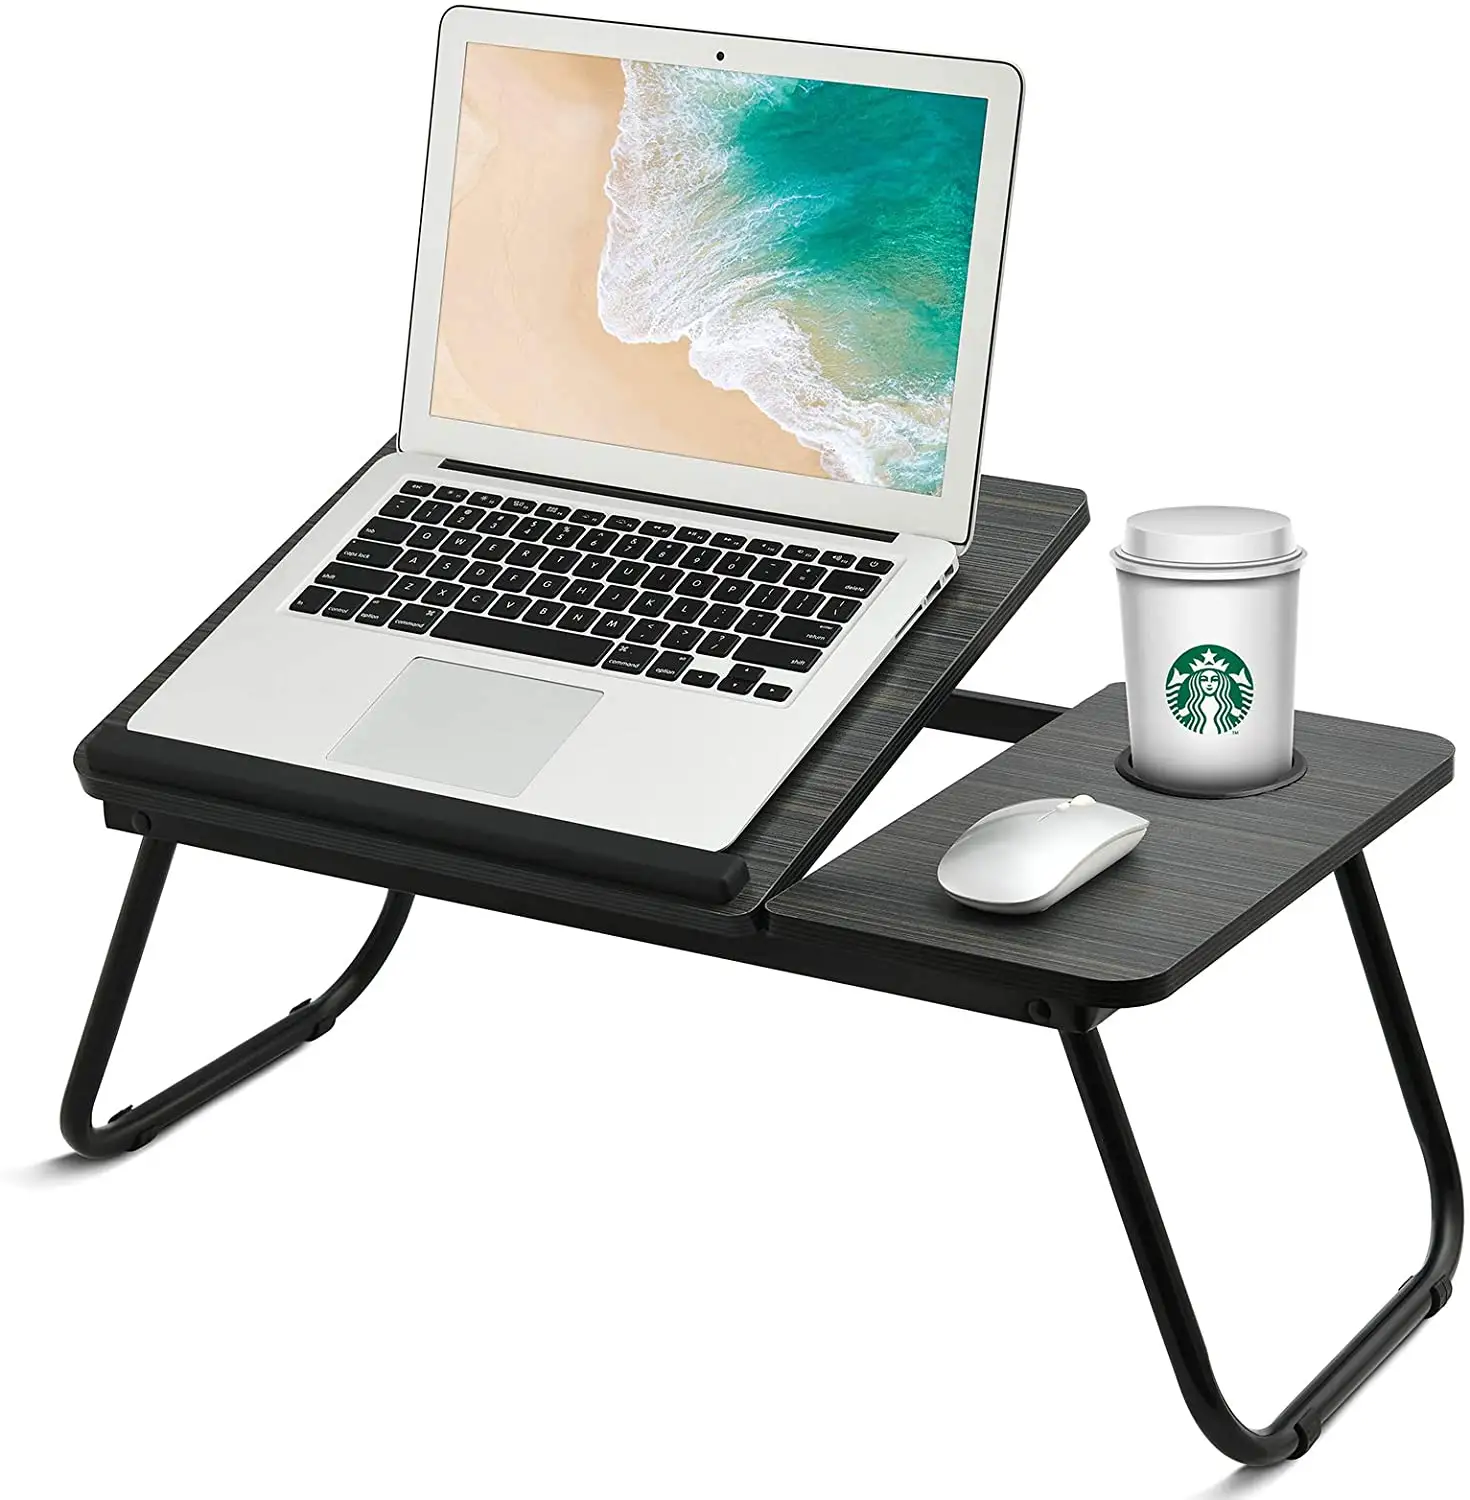 Lap Desk Adjustable 17 inches Laptop Desk Table for Bed Sofa, Portable Bed Top laptop Table for Eating Writing Reading